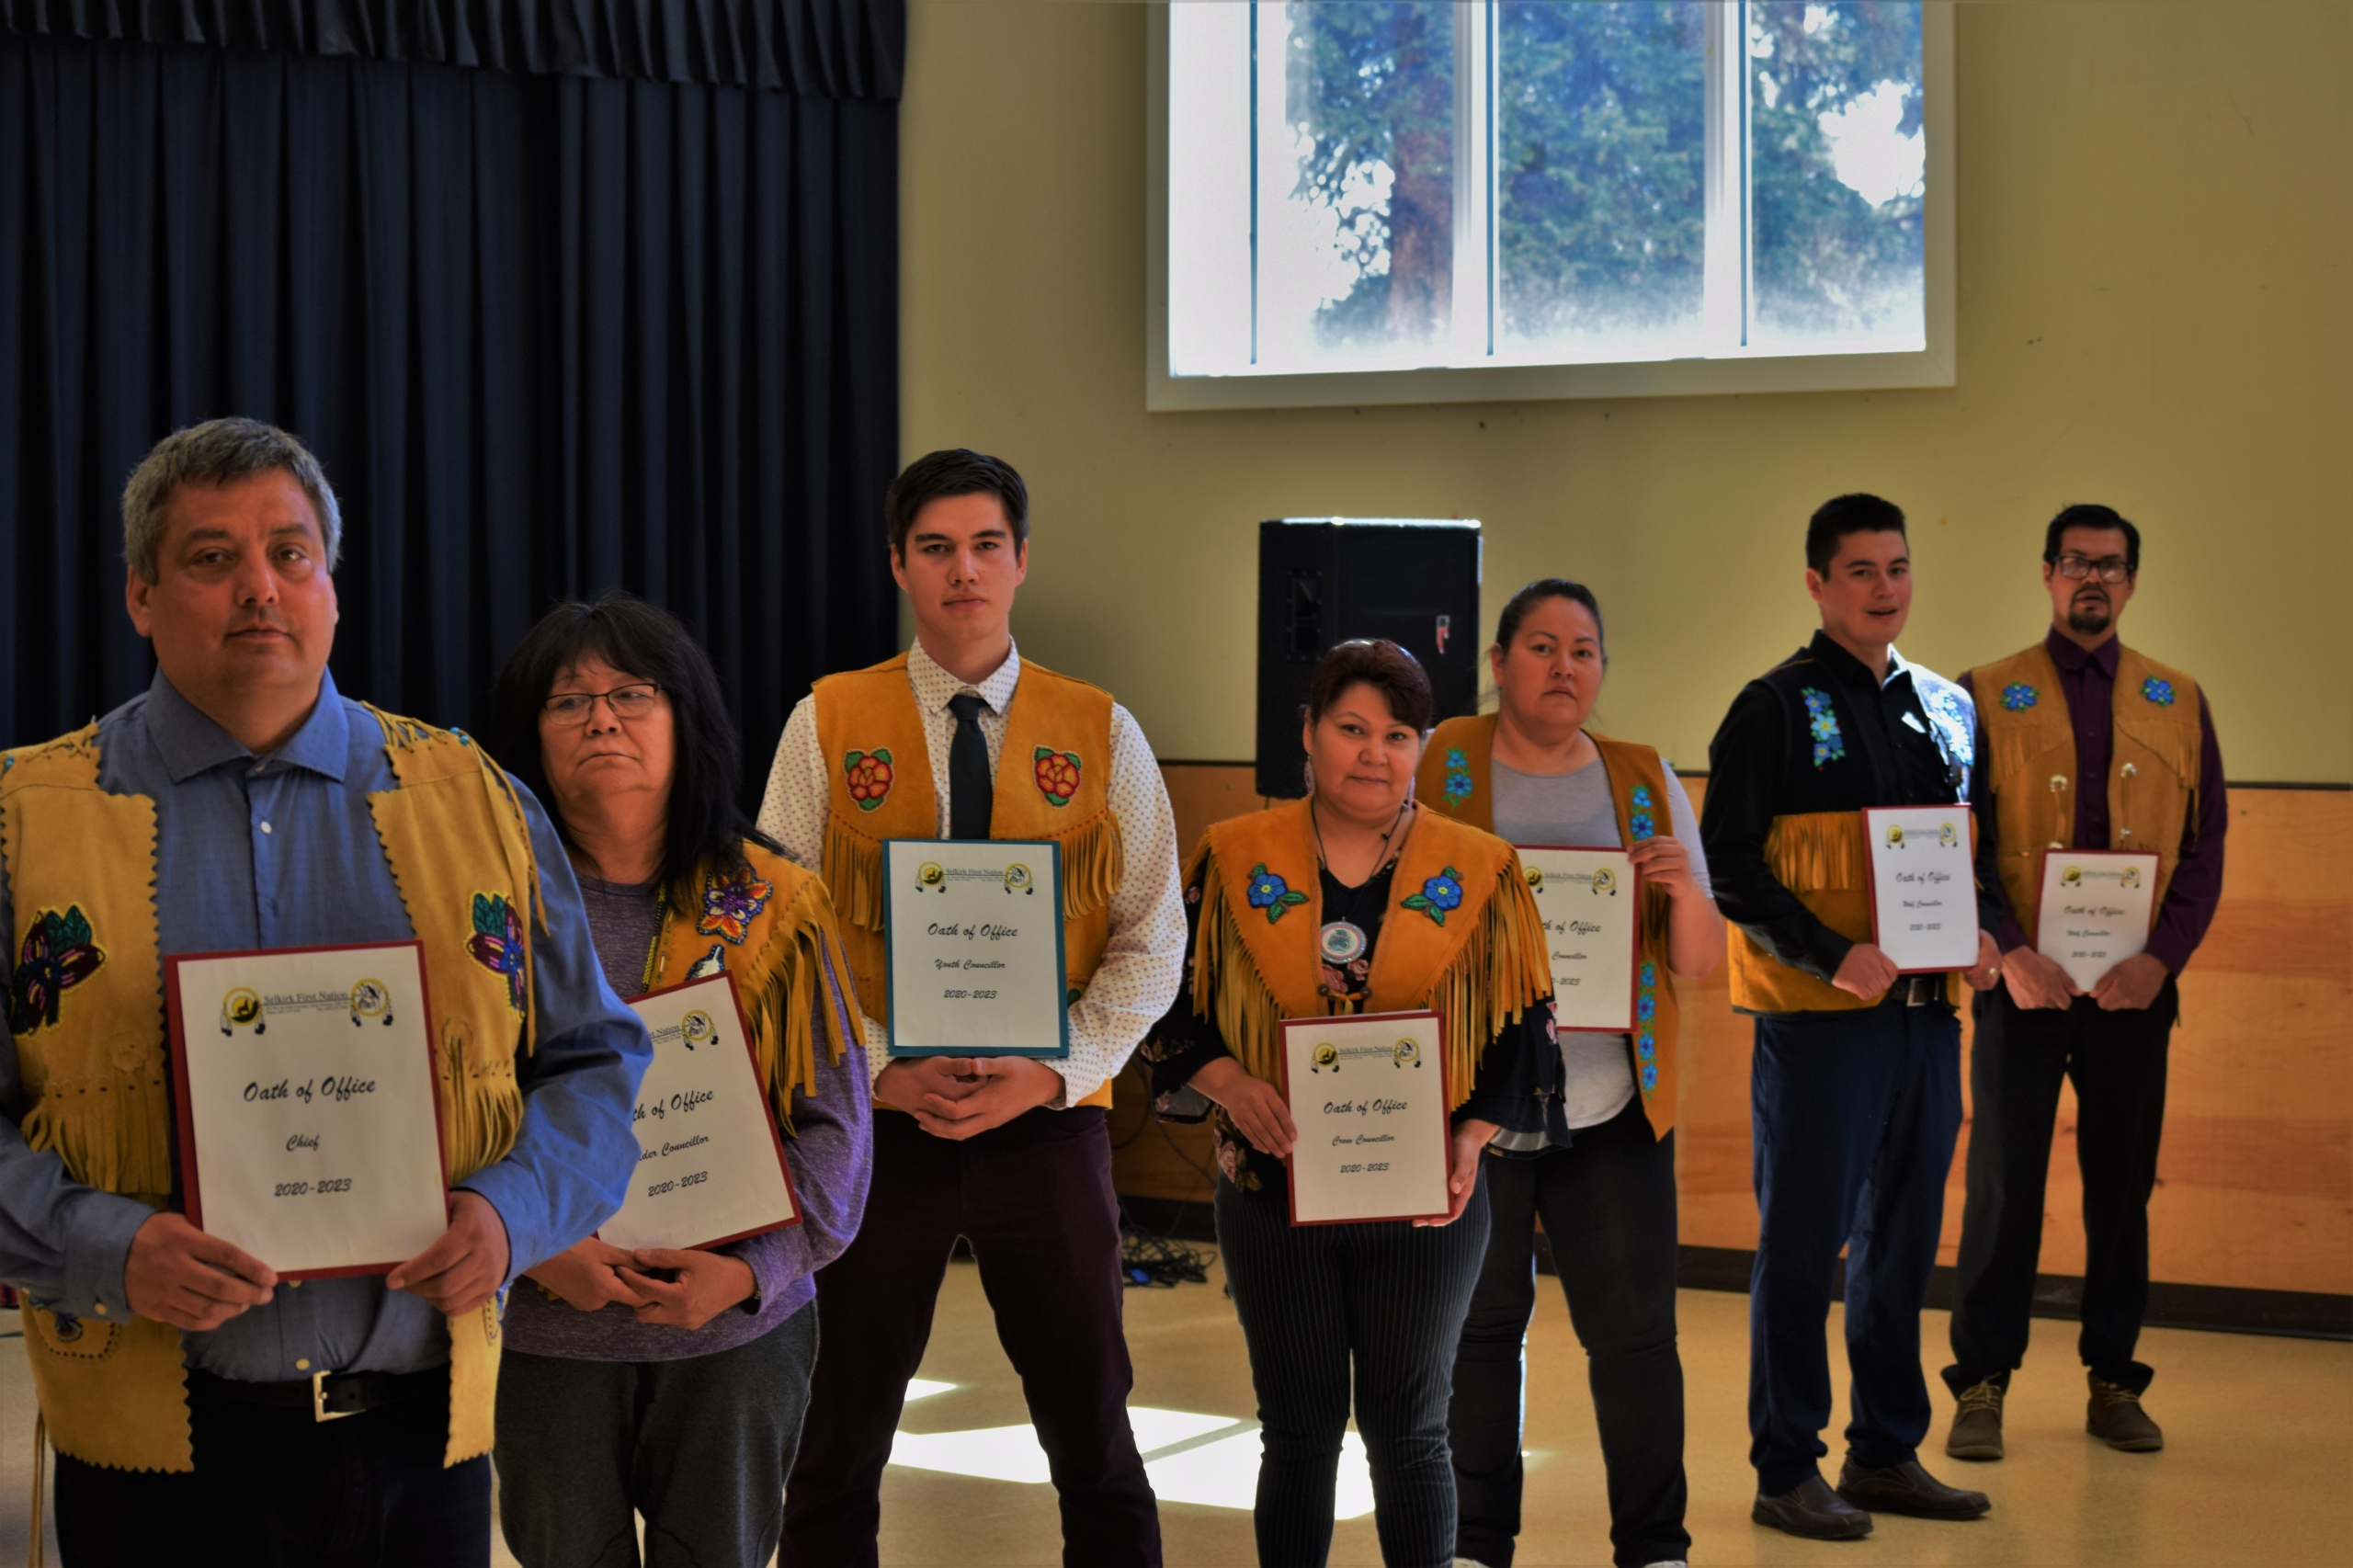 From Left to right: Chief Sharon Nelson, Wolf Councillor, George McGinty, Youth Councillor, Morris Morrison, Wolf Councillor, Dean Gill, Elder Councillor, Milly Johnson, Crow Councillor, Nesta Hager, missing Crow Councillor, Teddy Charlie 